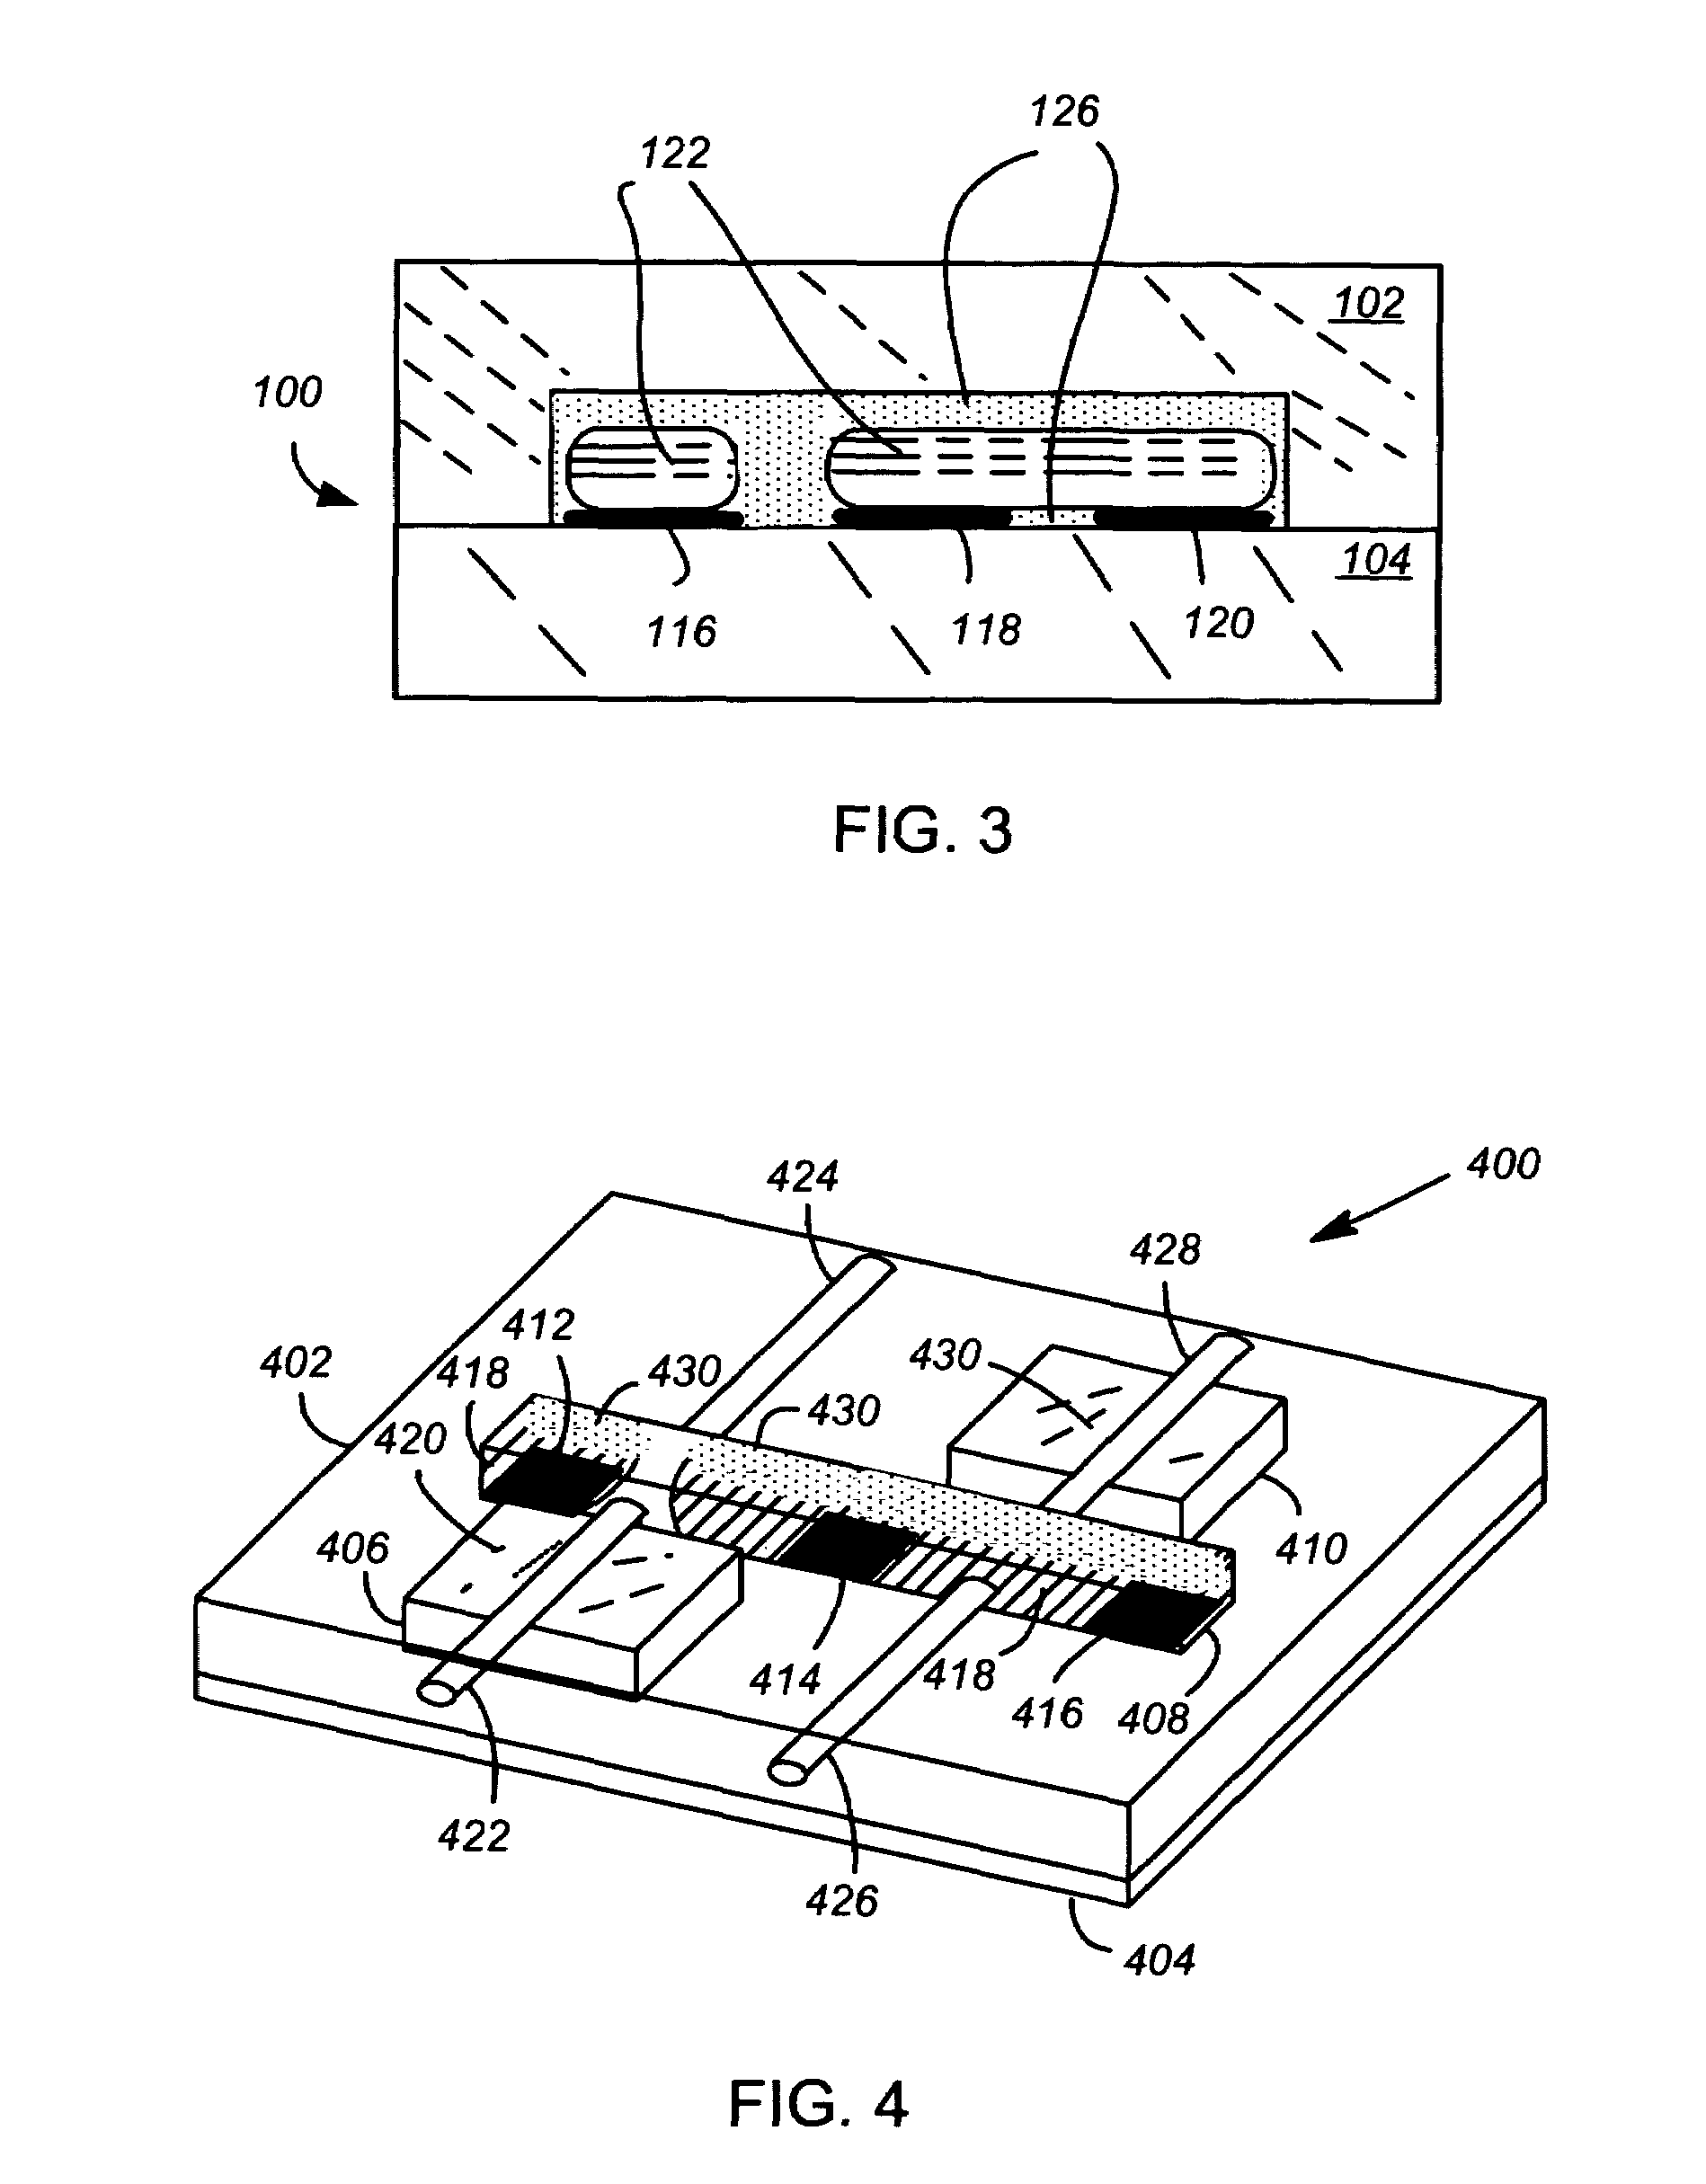 Reduction of oxides in a fluid-based switch